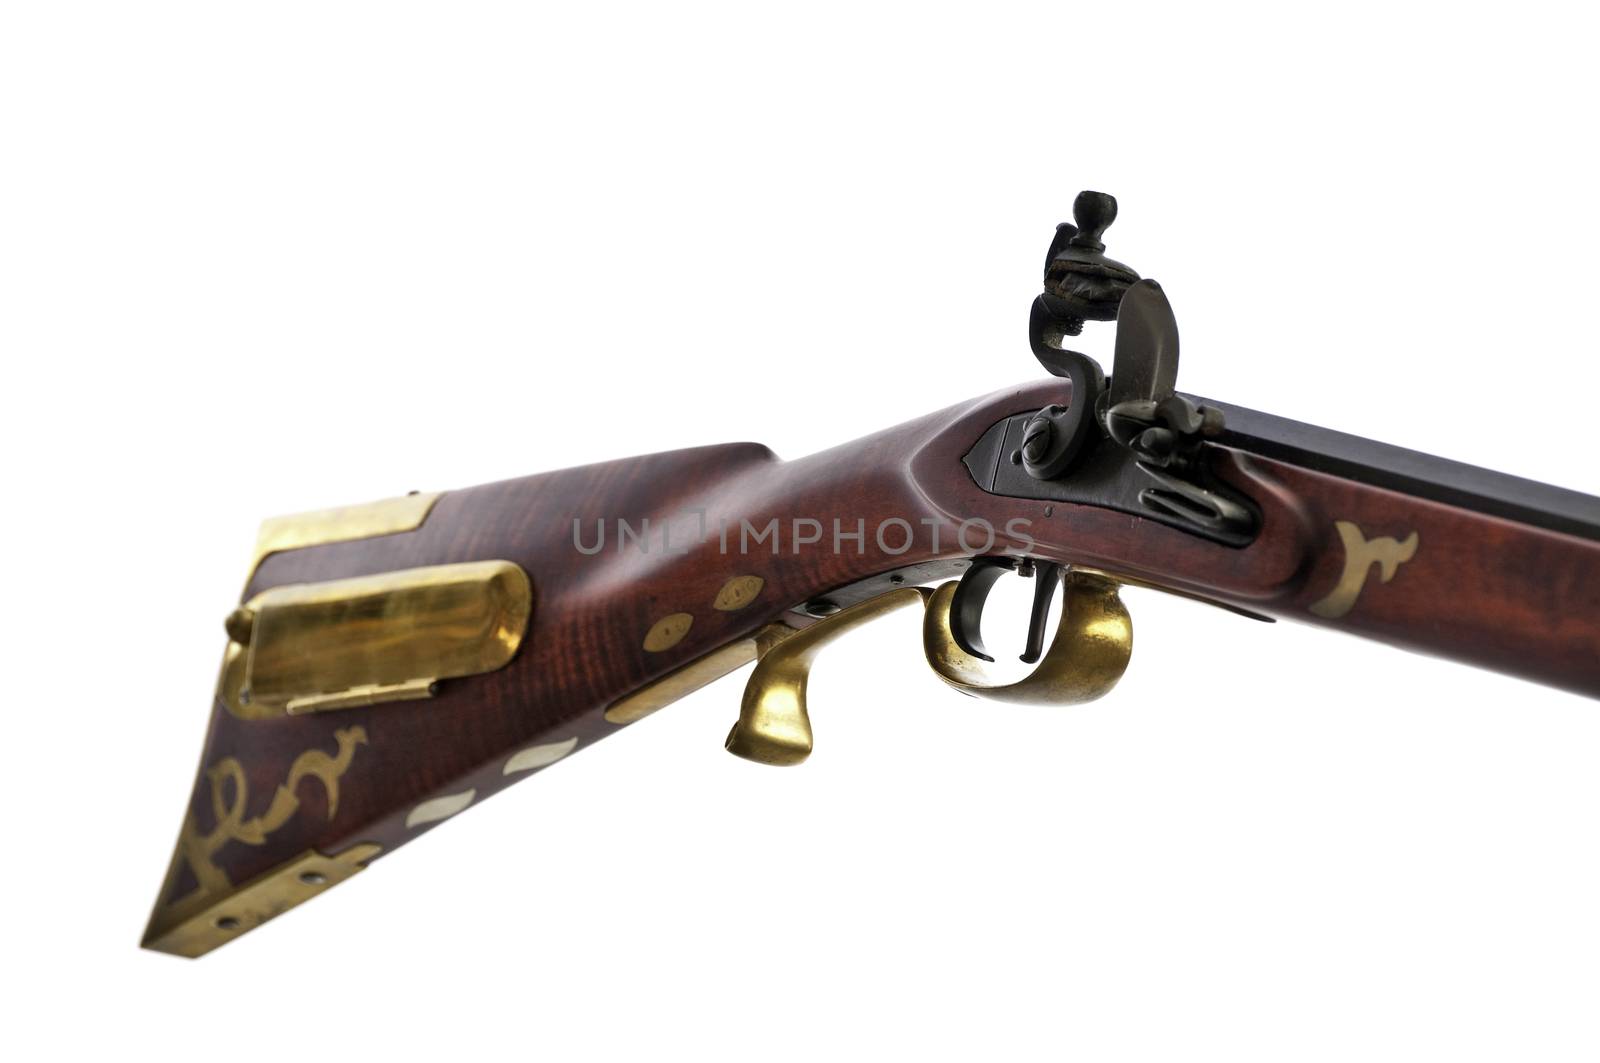 close up view of black powder rifle showing the brass inlays and patch box on the stock.